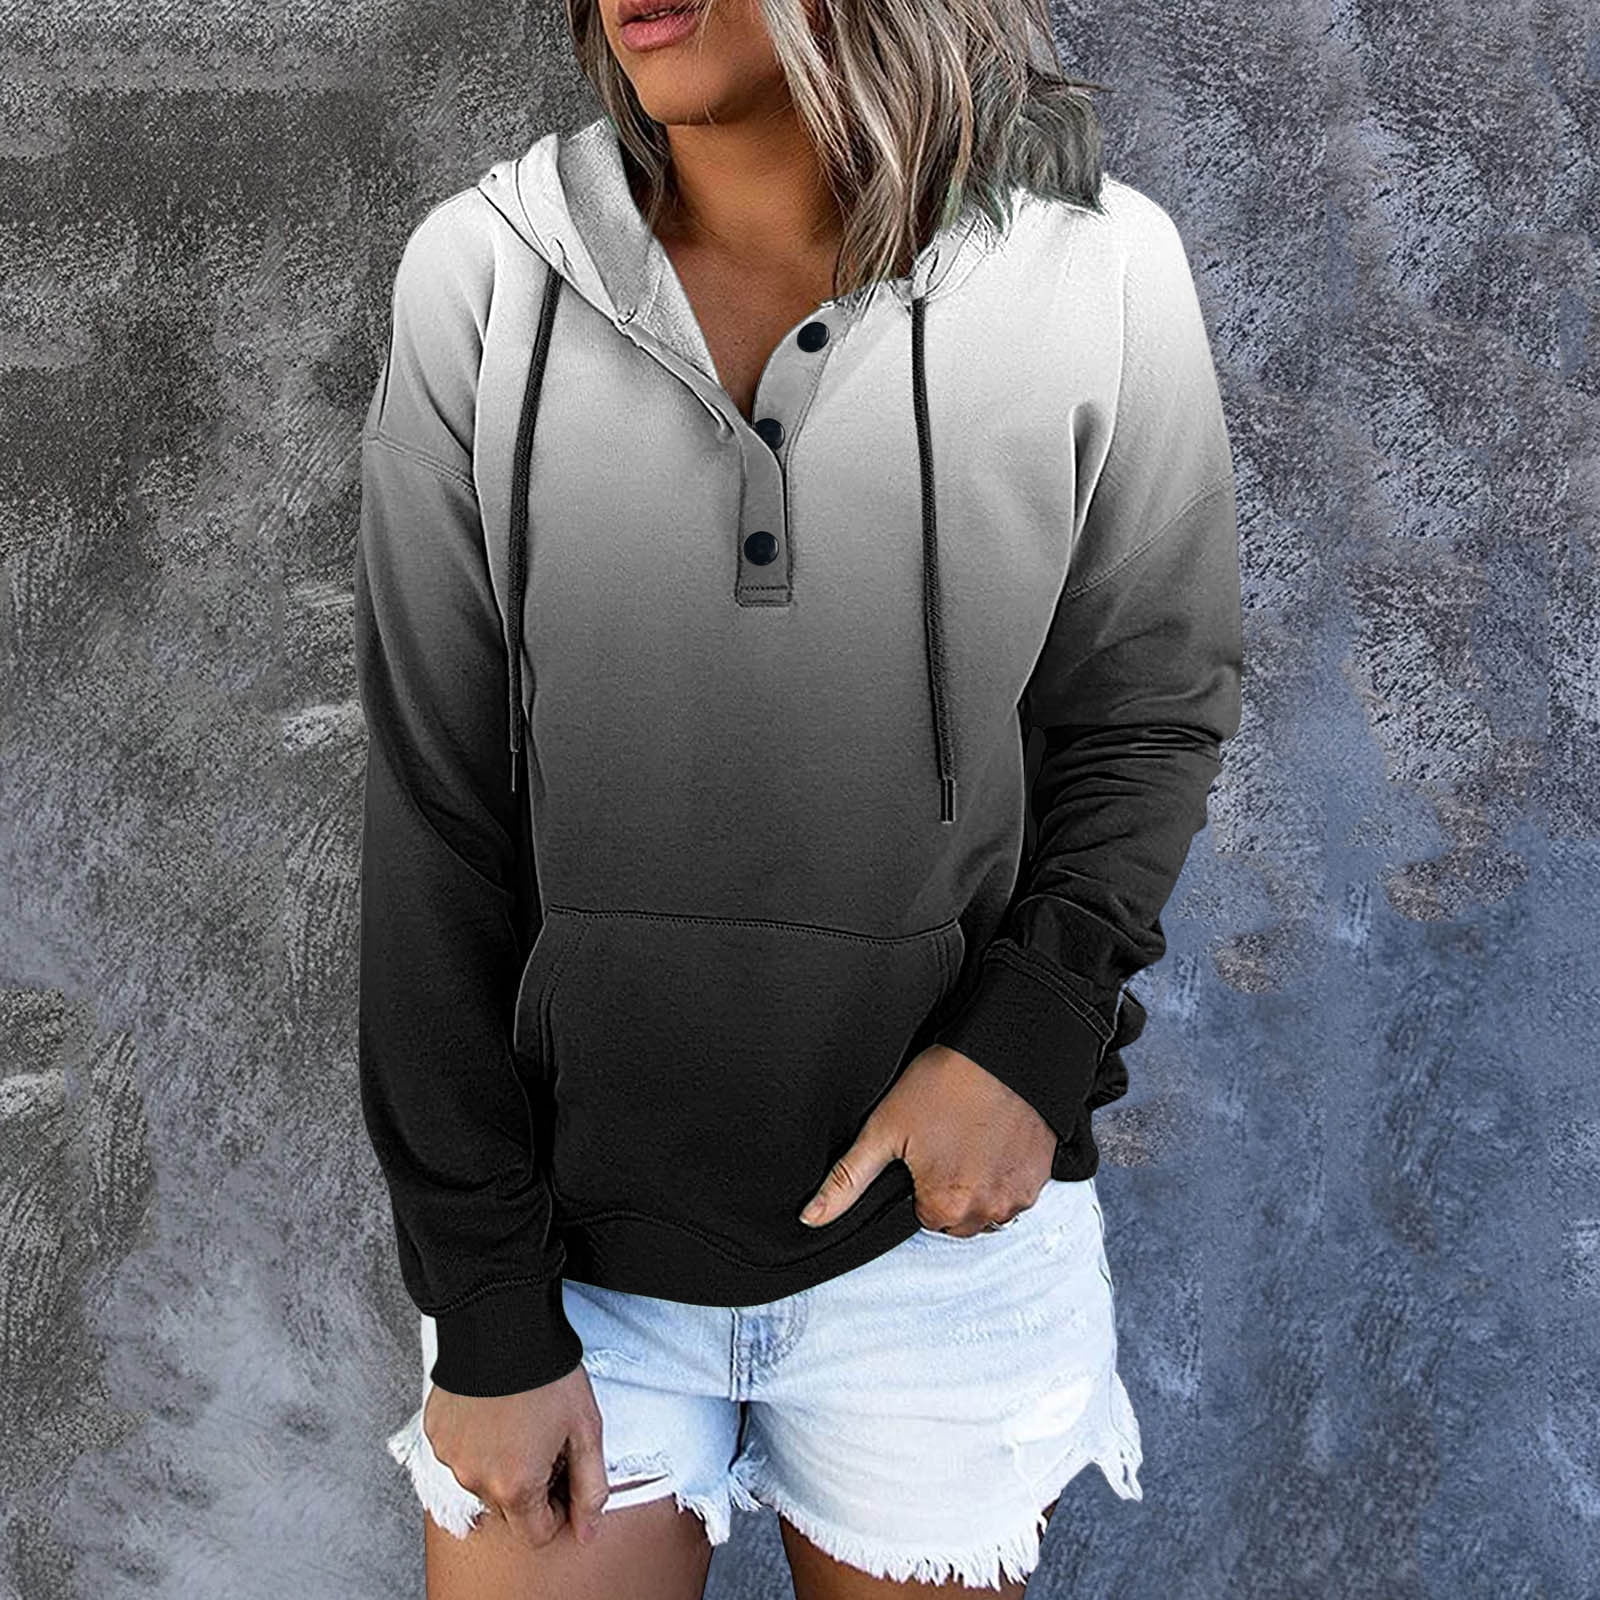 Hoodies for Women Casual Button Down Drawstring Pullover Hooded Sweatshirts Long Sleeve Fall Tops Sweaters Shirts 